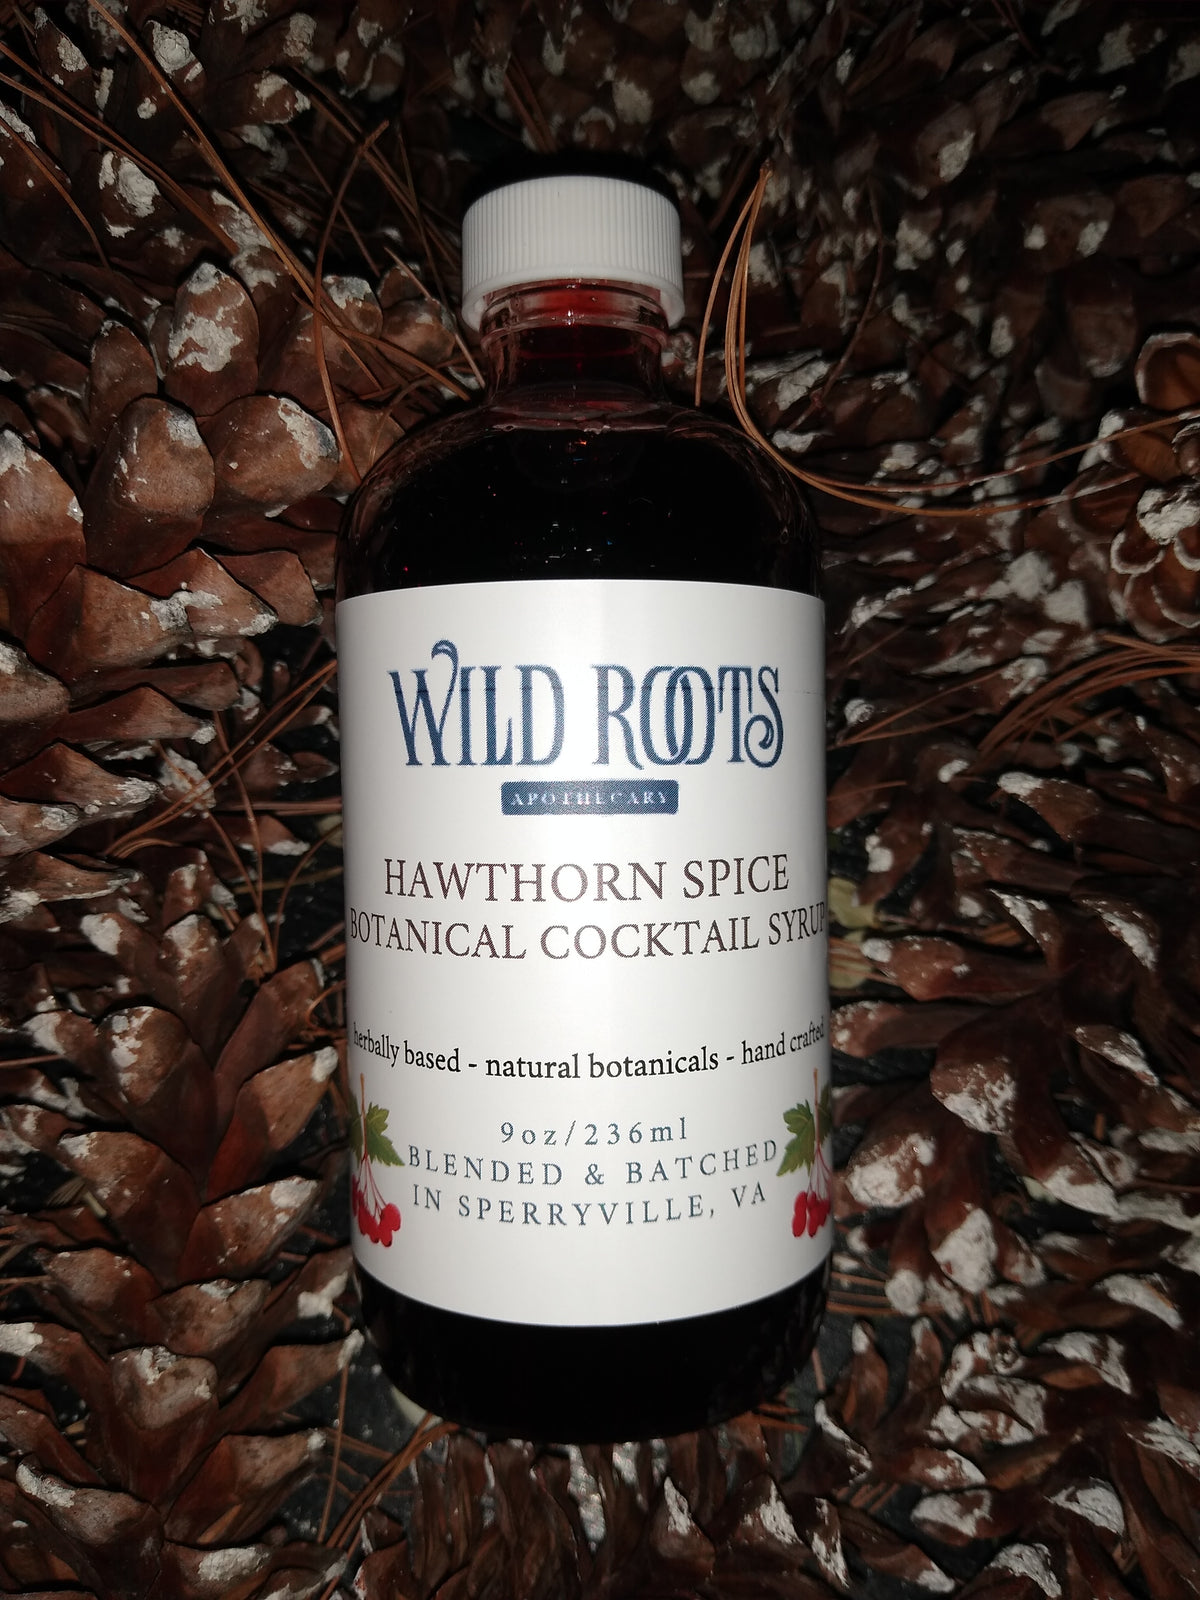 Hawthorn Spice Botanical Syrup—Wild Roots Apothecary